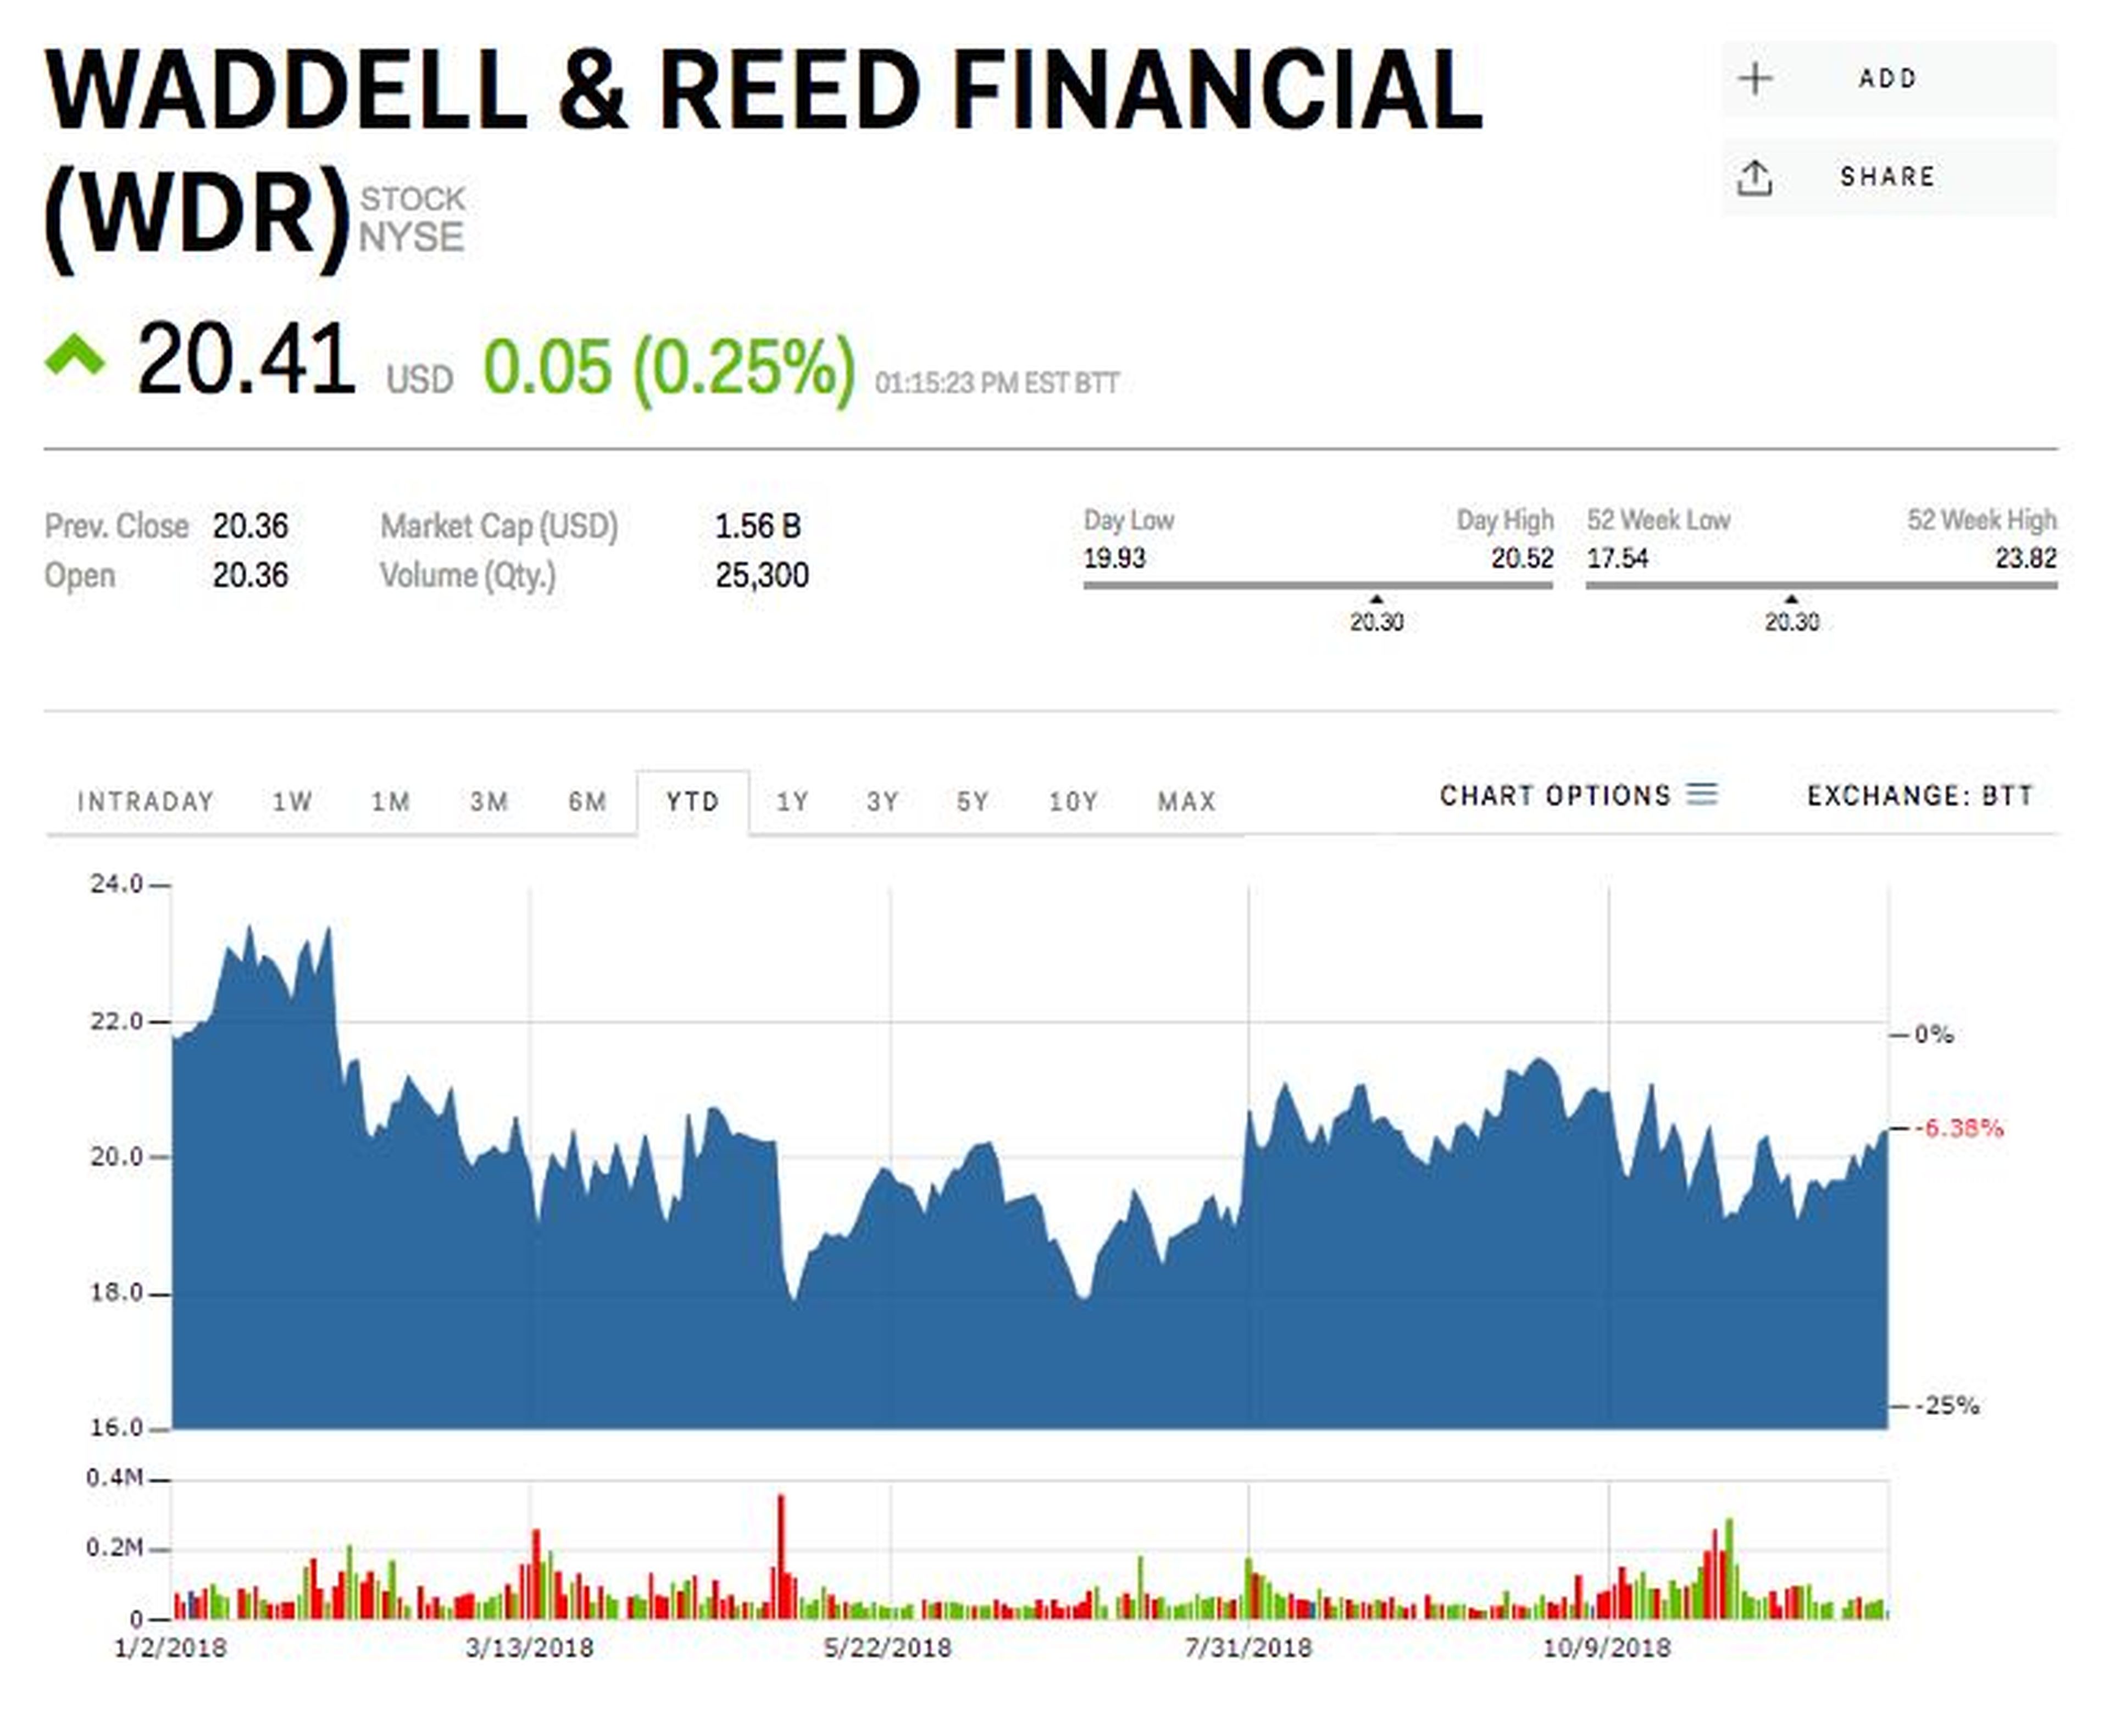 11. Waddell & Reed Financial